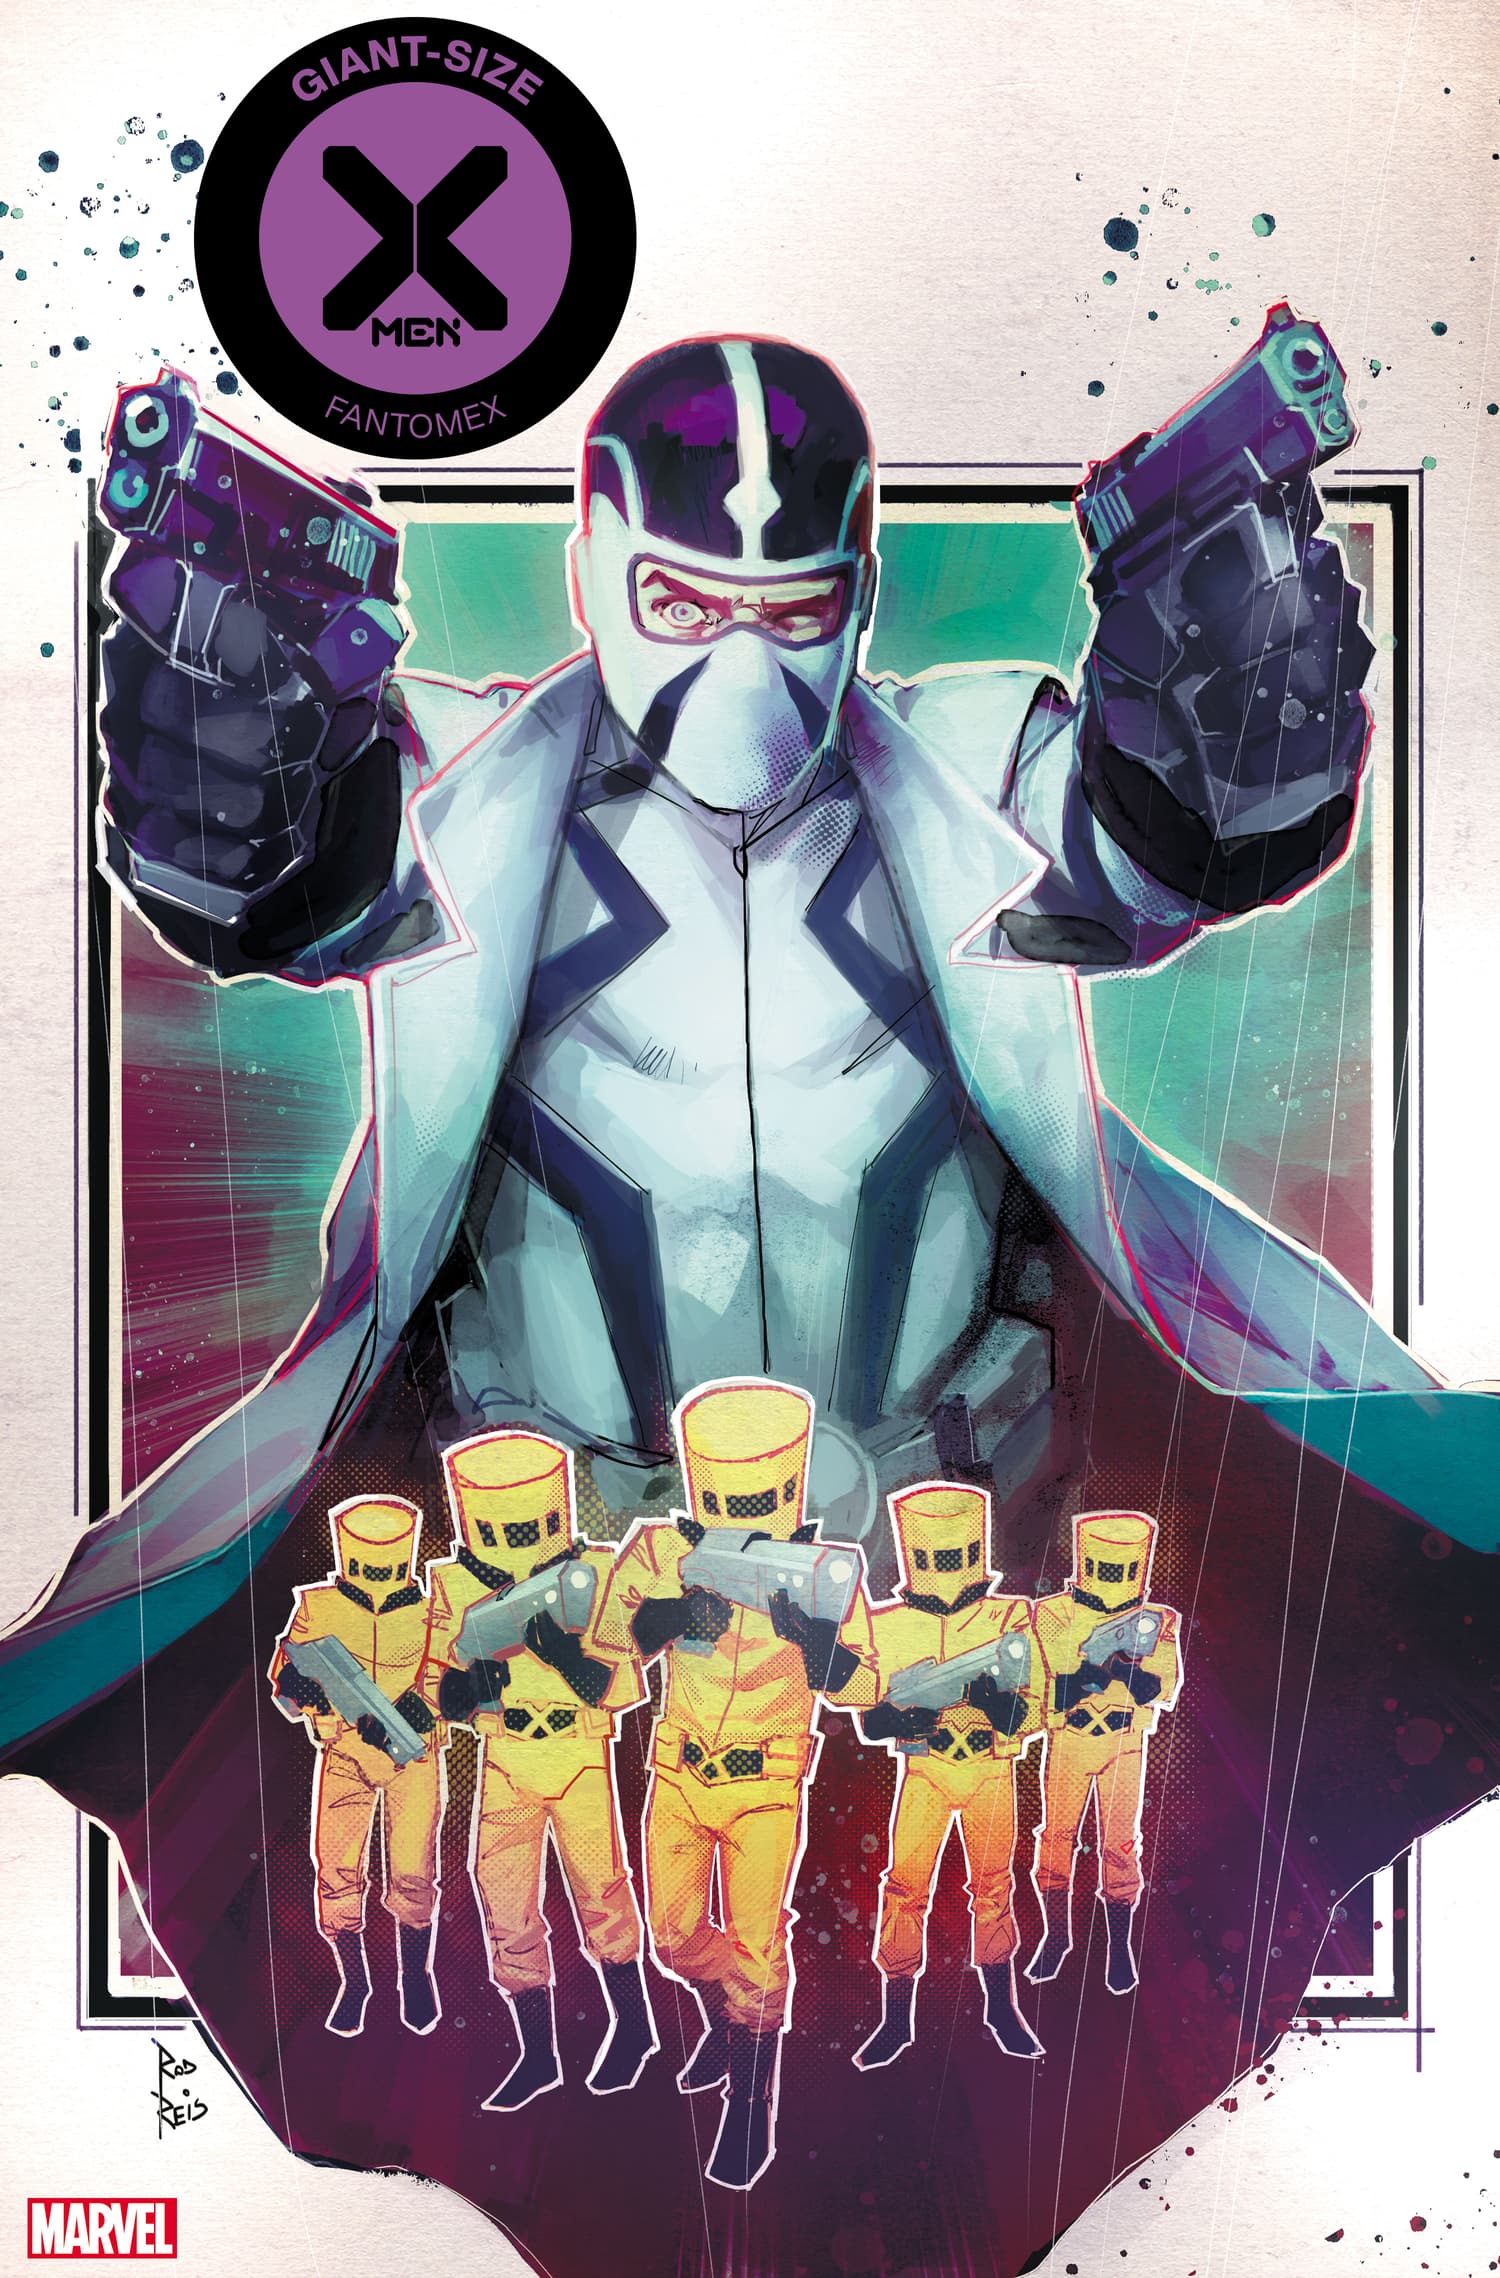 GIANT-SIZE X-MEN: FANTOMEX #1 cover by Rod Reis